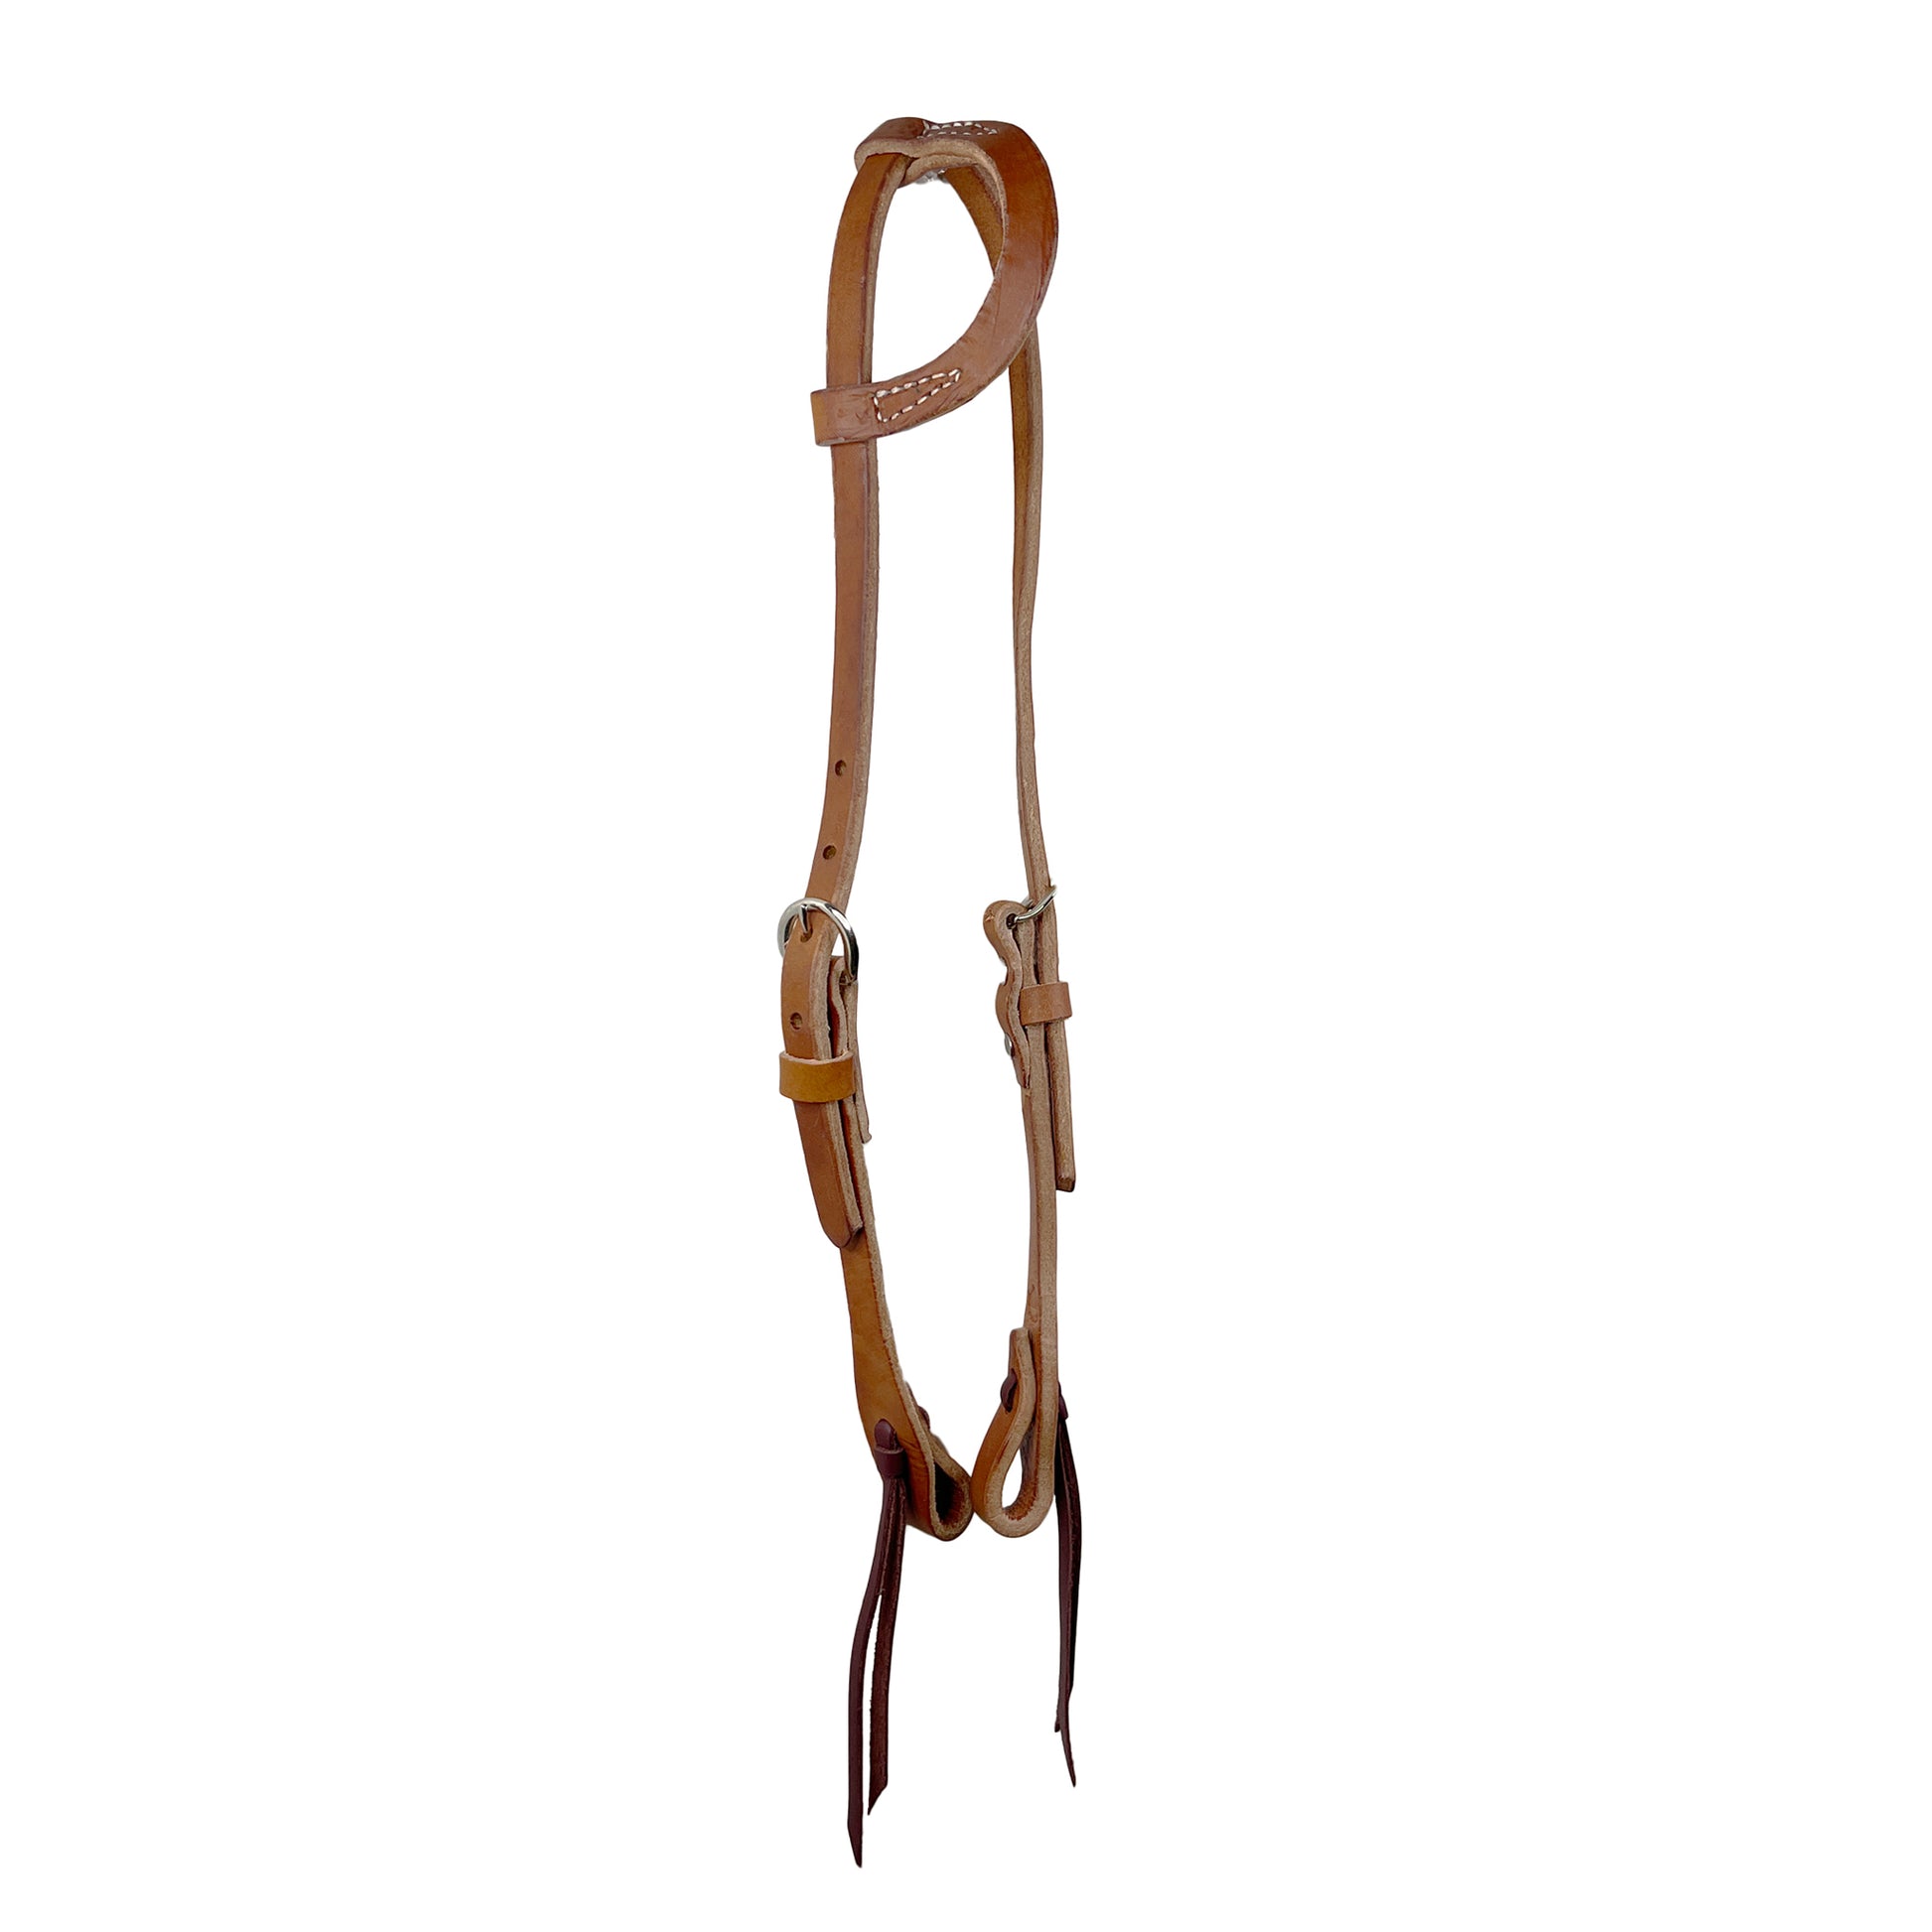 5/8" Flat one ear headstall harness leather.